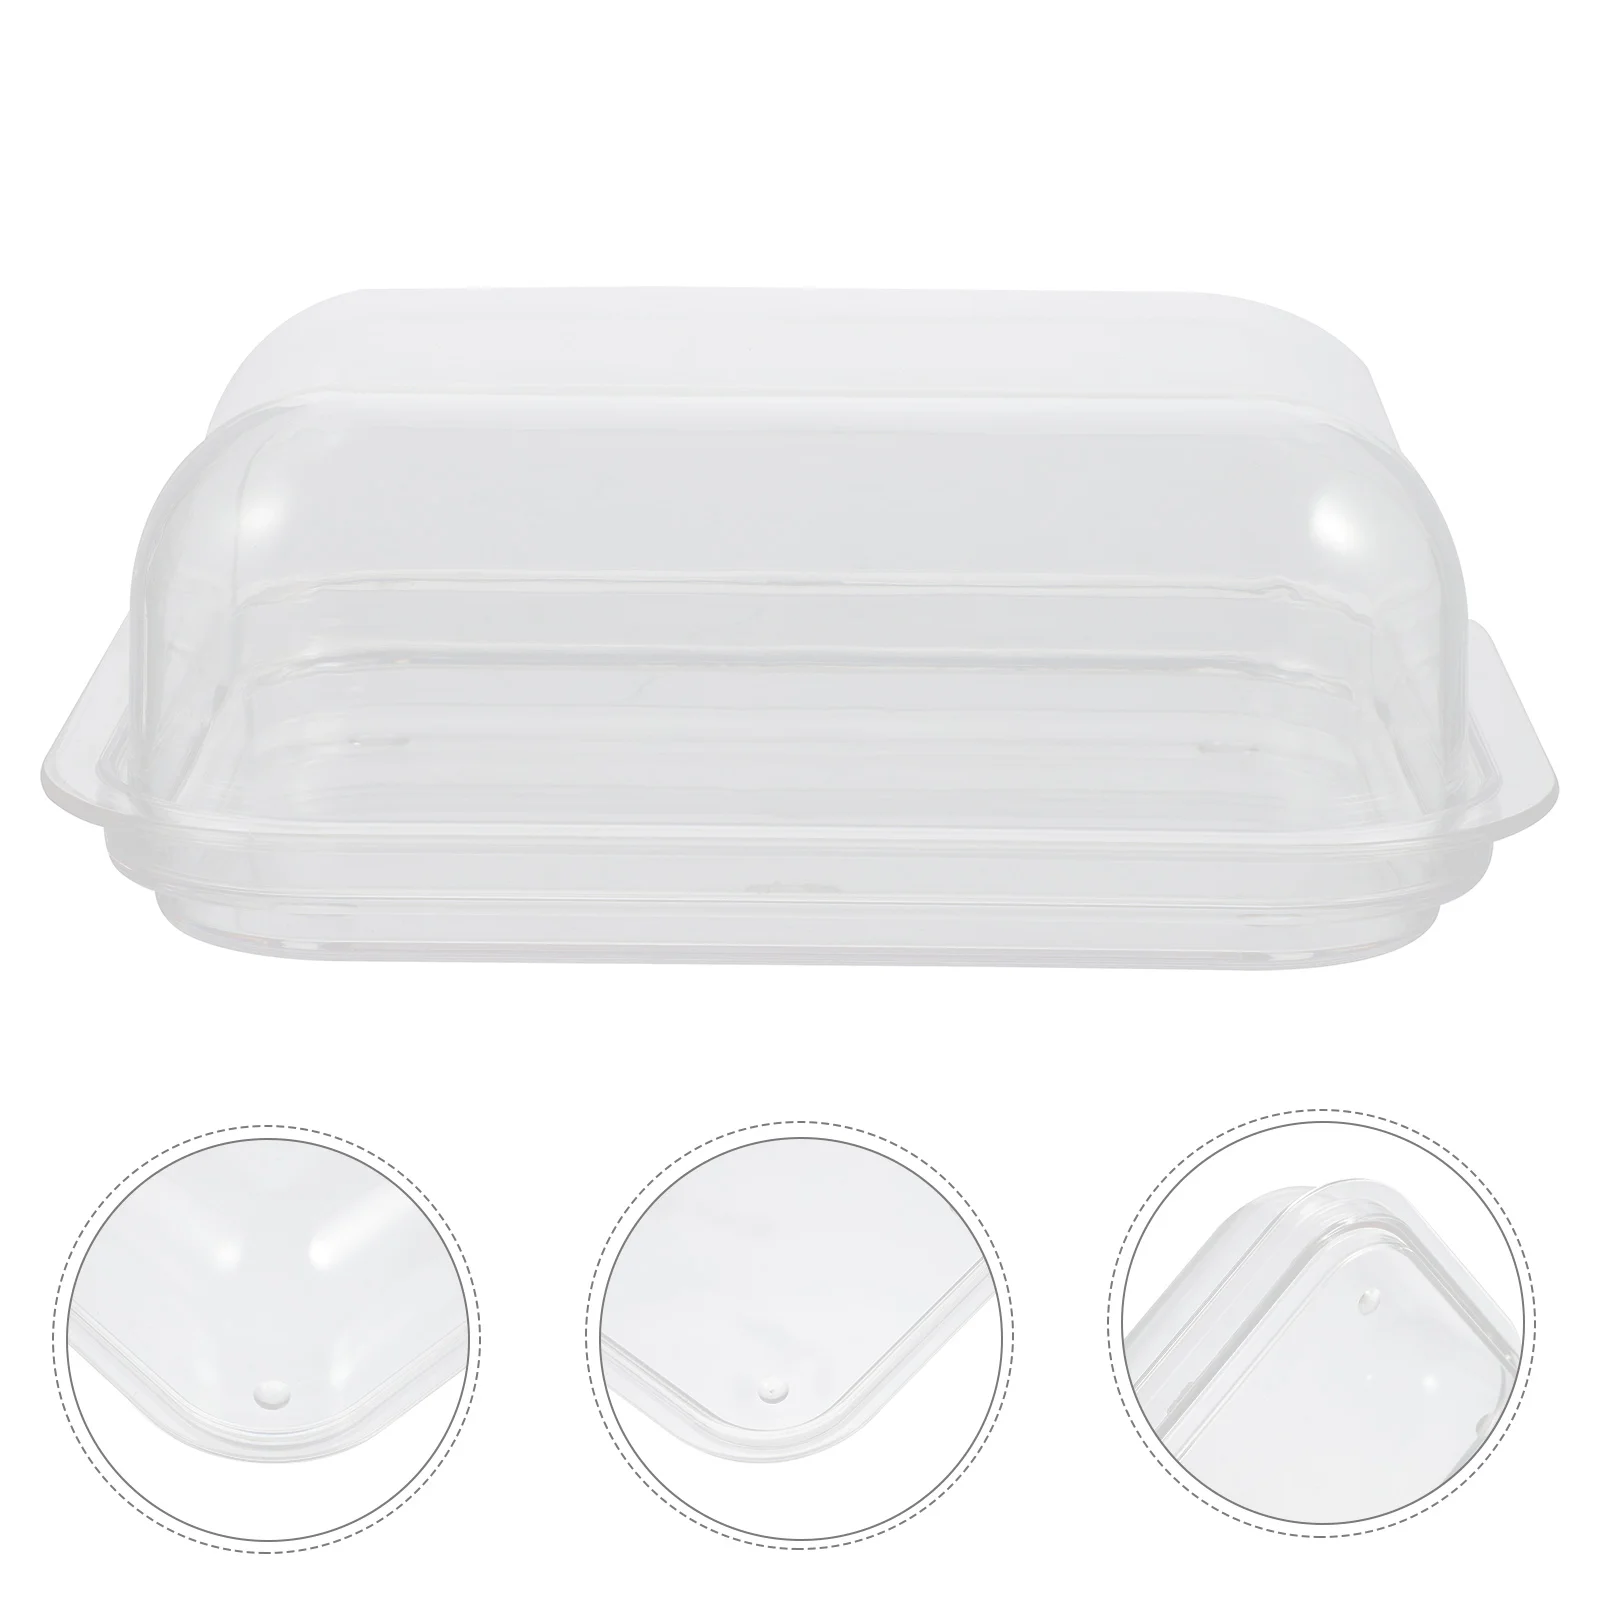 

Sealed Food Container Mini Plastic Containers Covered Butter Container Covered Butter Keeper Service Plate Ceramic Serving Tray